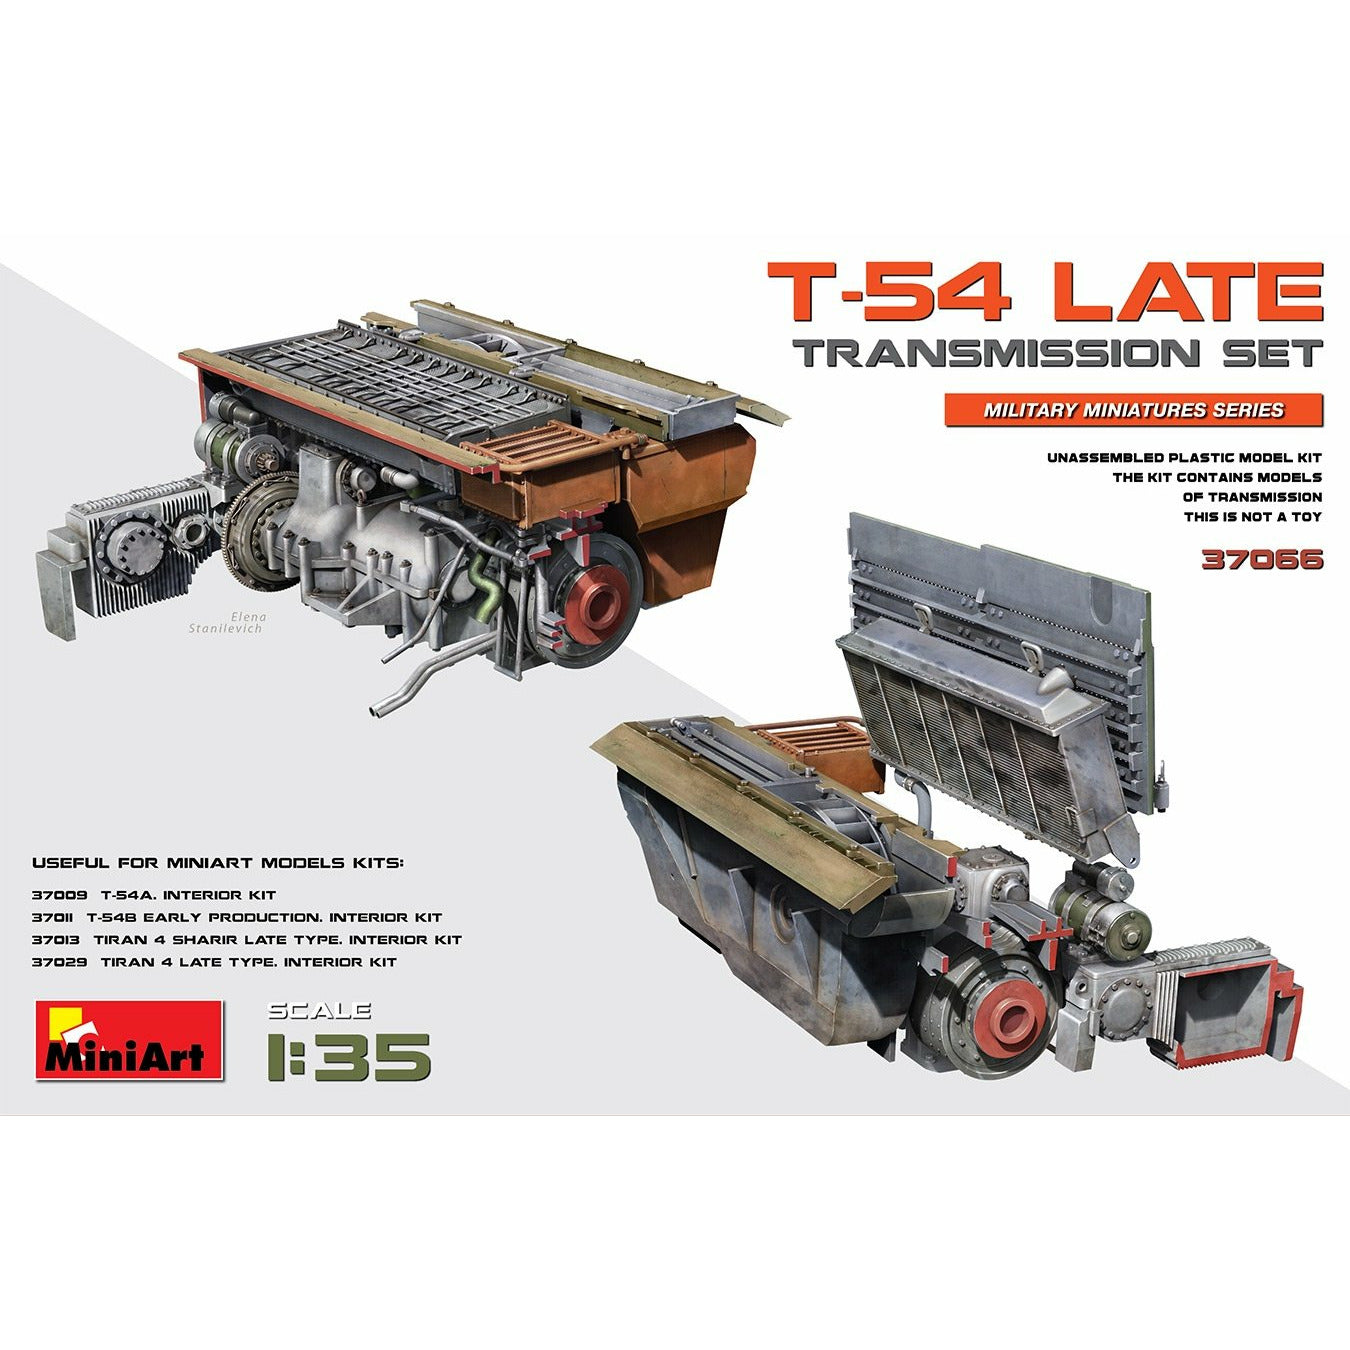 T-54 Late Transmission Set 1/35 #37066 by Miniart